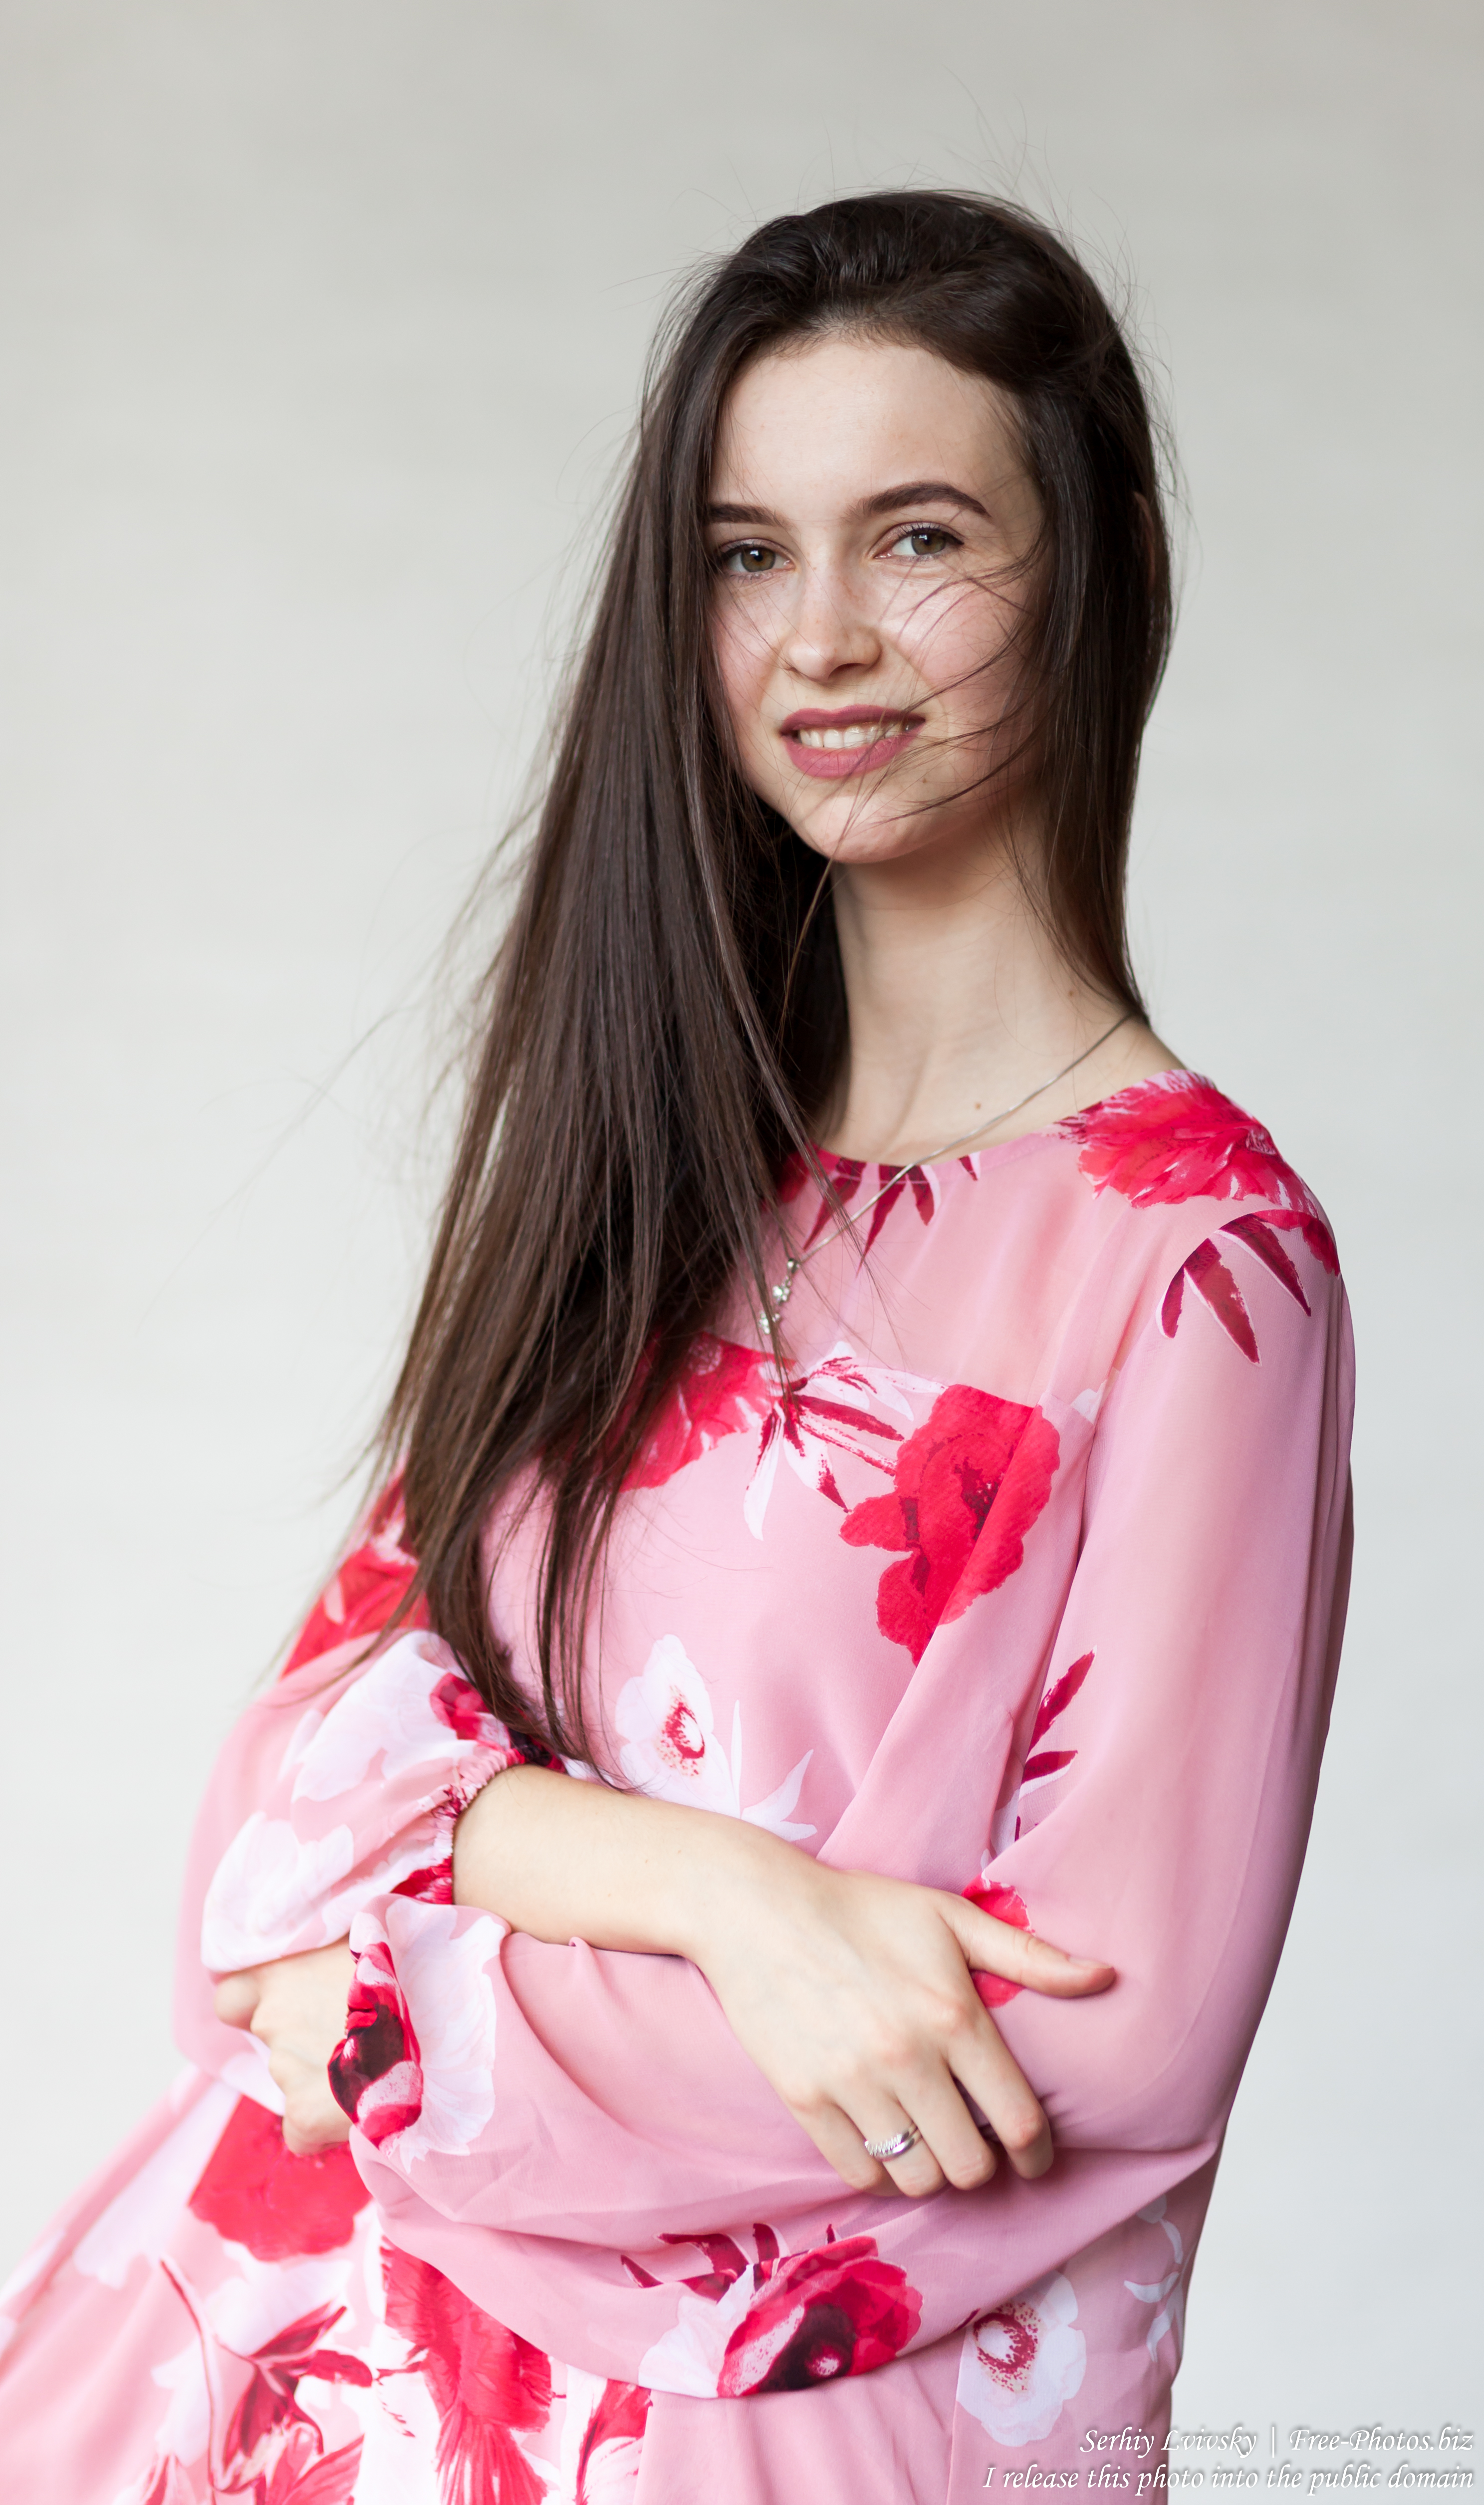 vika_a_25-year-old_brunette_woman_photographed_by_serhiy_lvivsky_in_july_2018_43